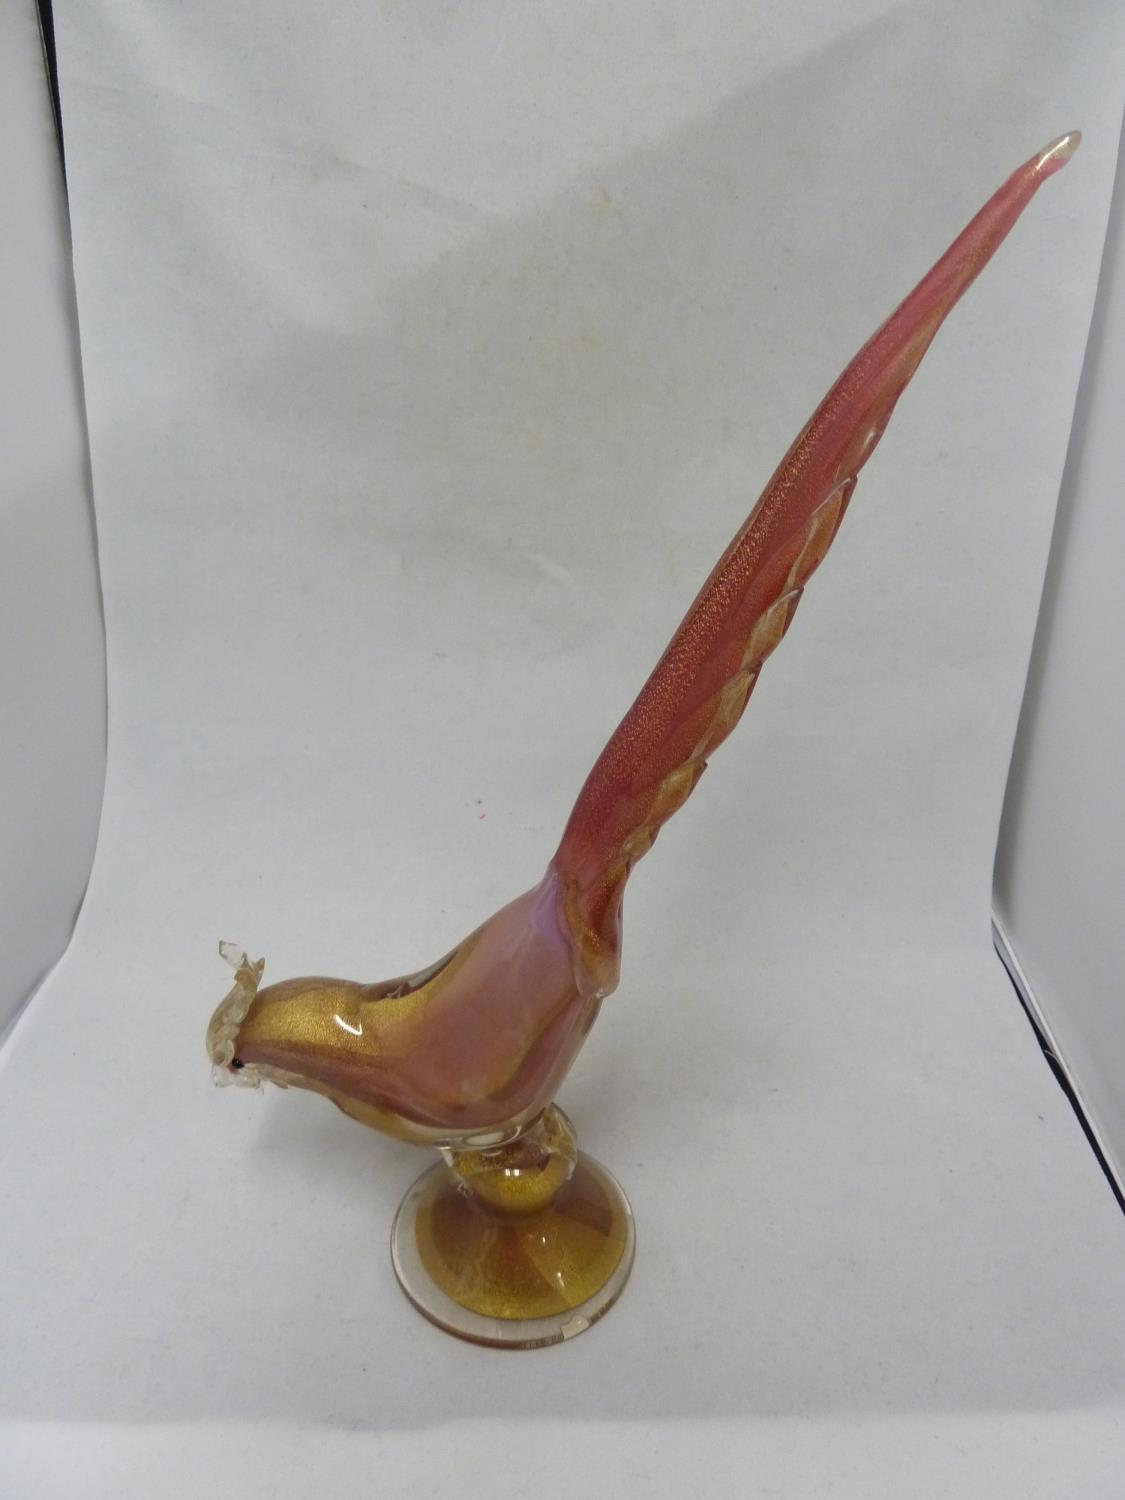 Murano glass - Pheasant - modelled standing with elongated tail upright, in pink and aventurine gold